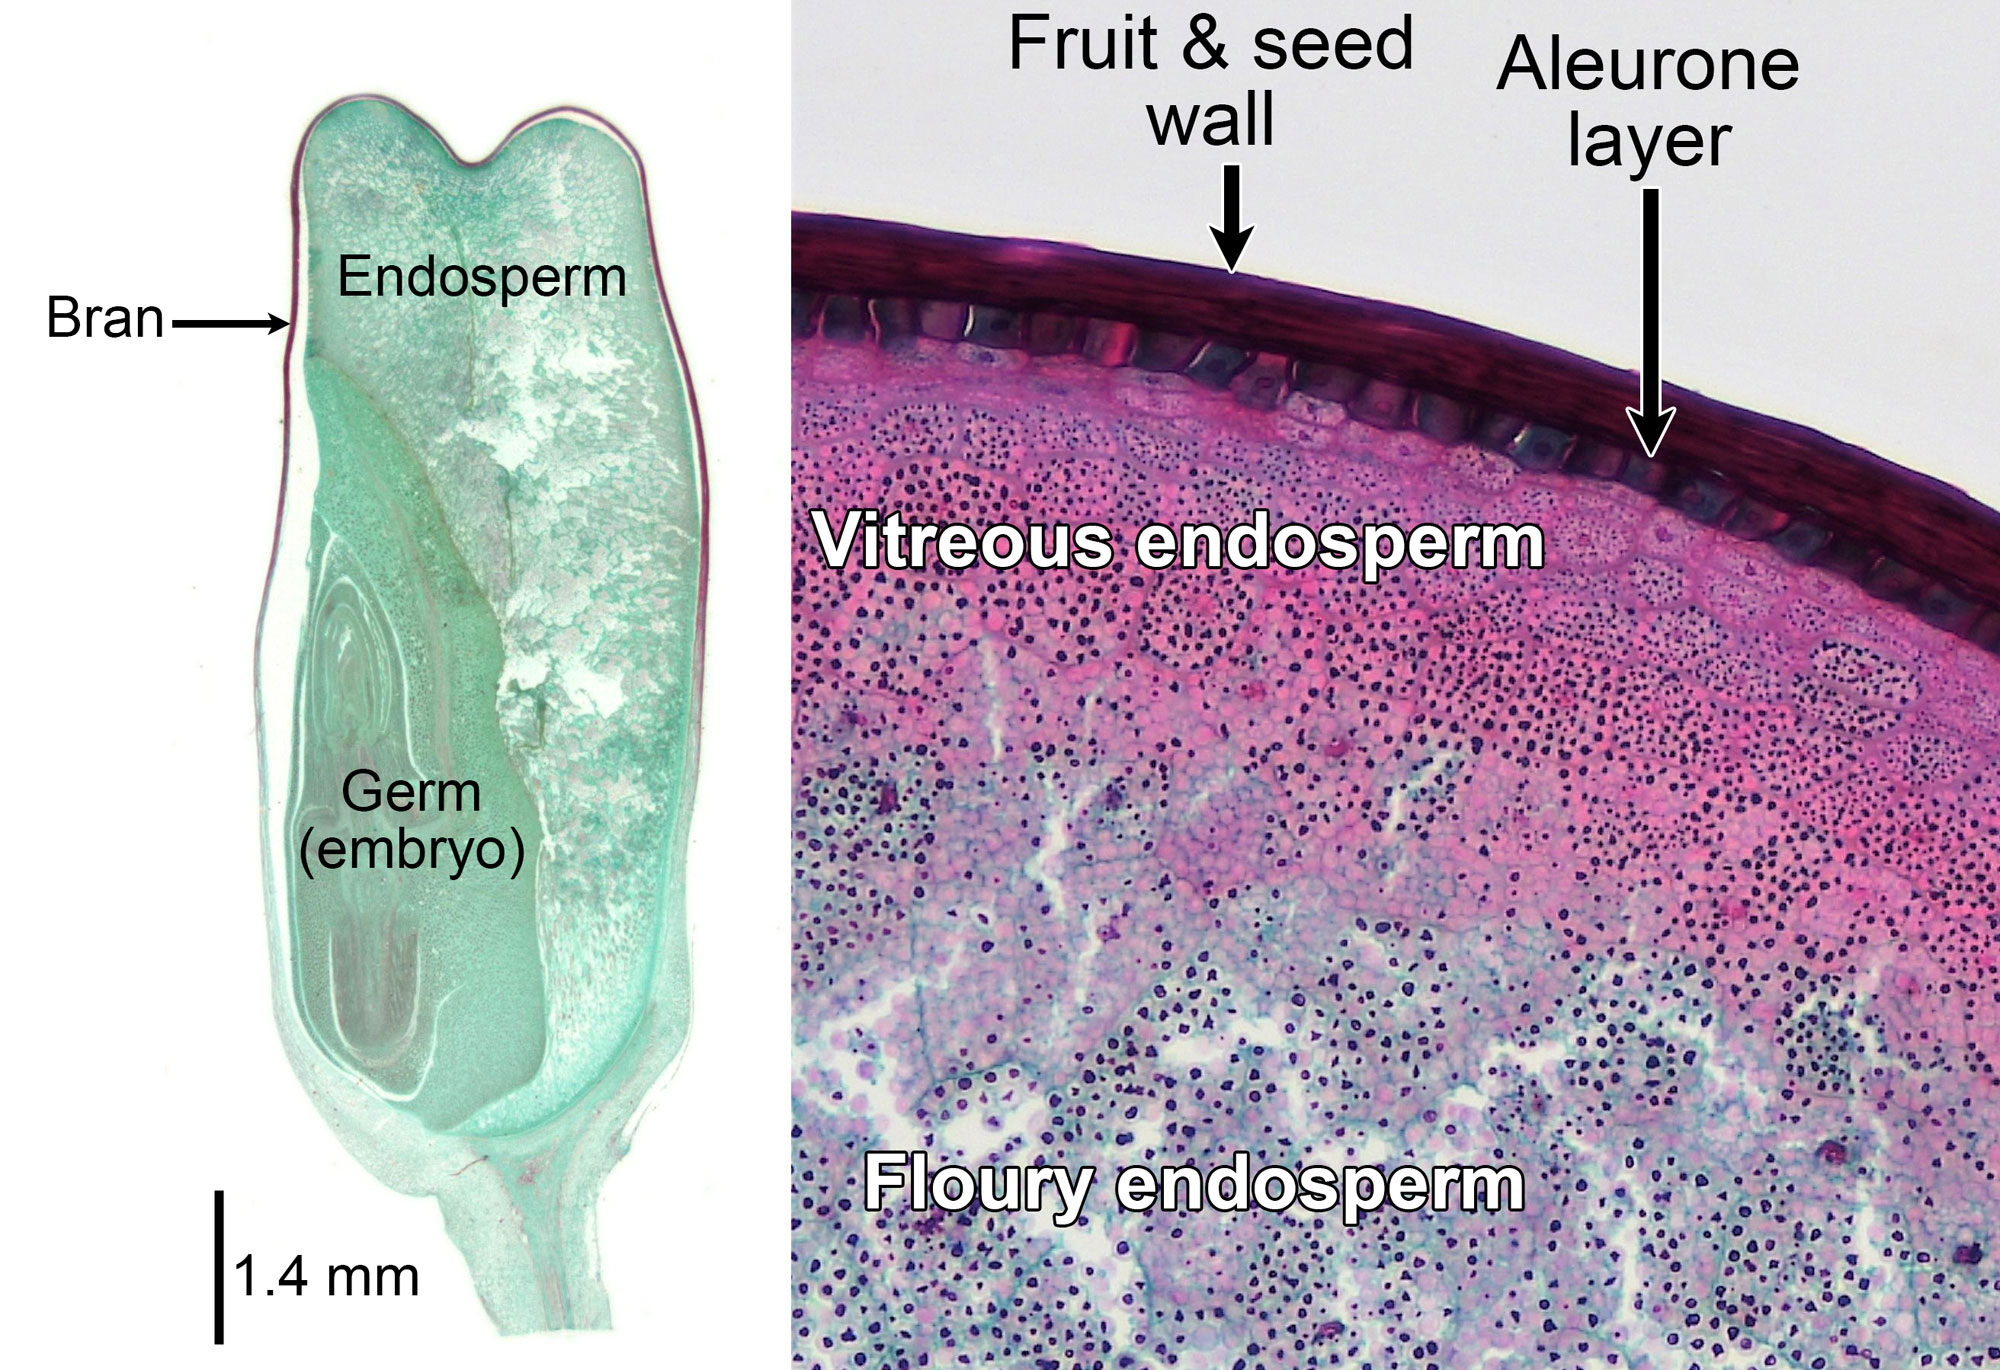 No tagsTwo-panel image showing photographs of maize embryo microscope slides. Panel 1: Longitudinal section of a maize kernel with the parts labeled, including the bran (fruit wall), the endosperm, and the germ (embryo). Panel 2: Detail of the fruit wall and underlying endosperm. The fruti and seed wall, aleurone layer, horny endosperm, and floury endosperm are labeled.